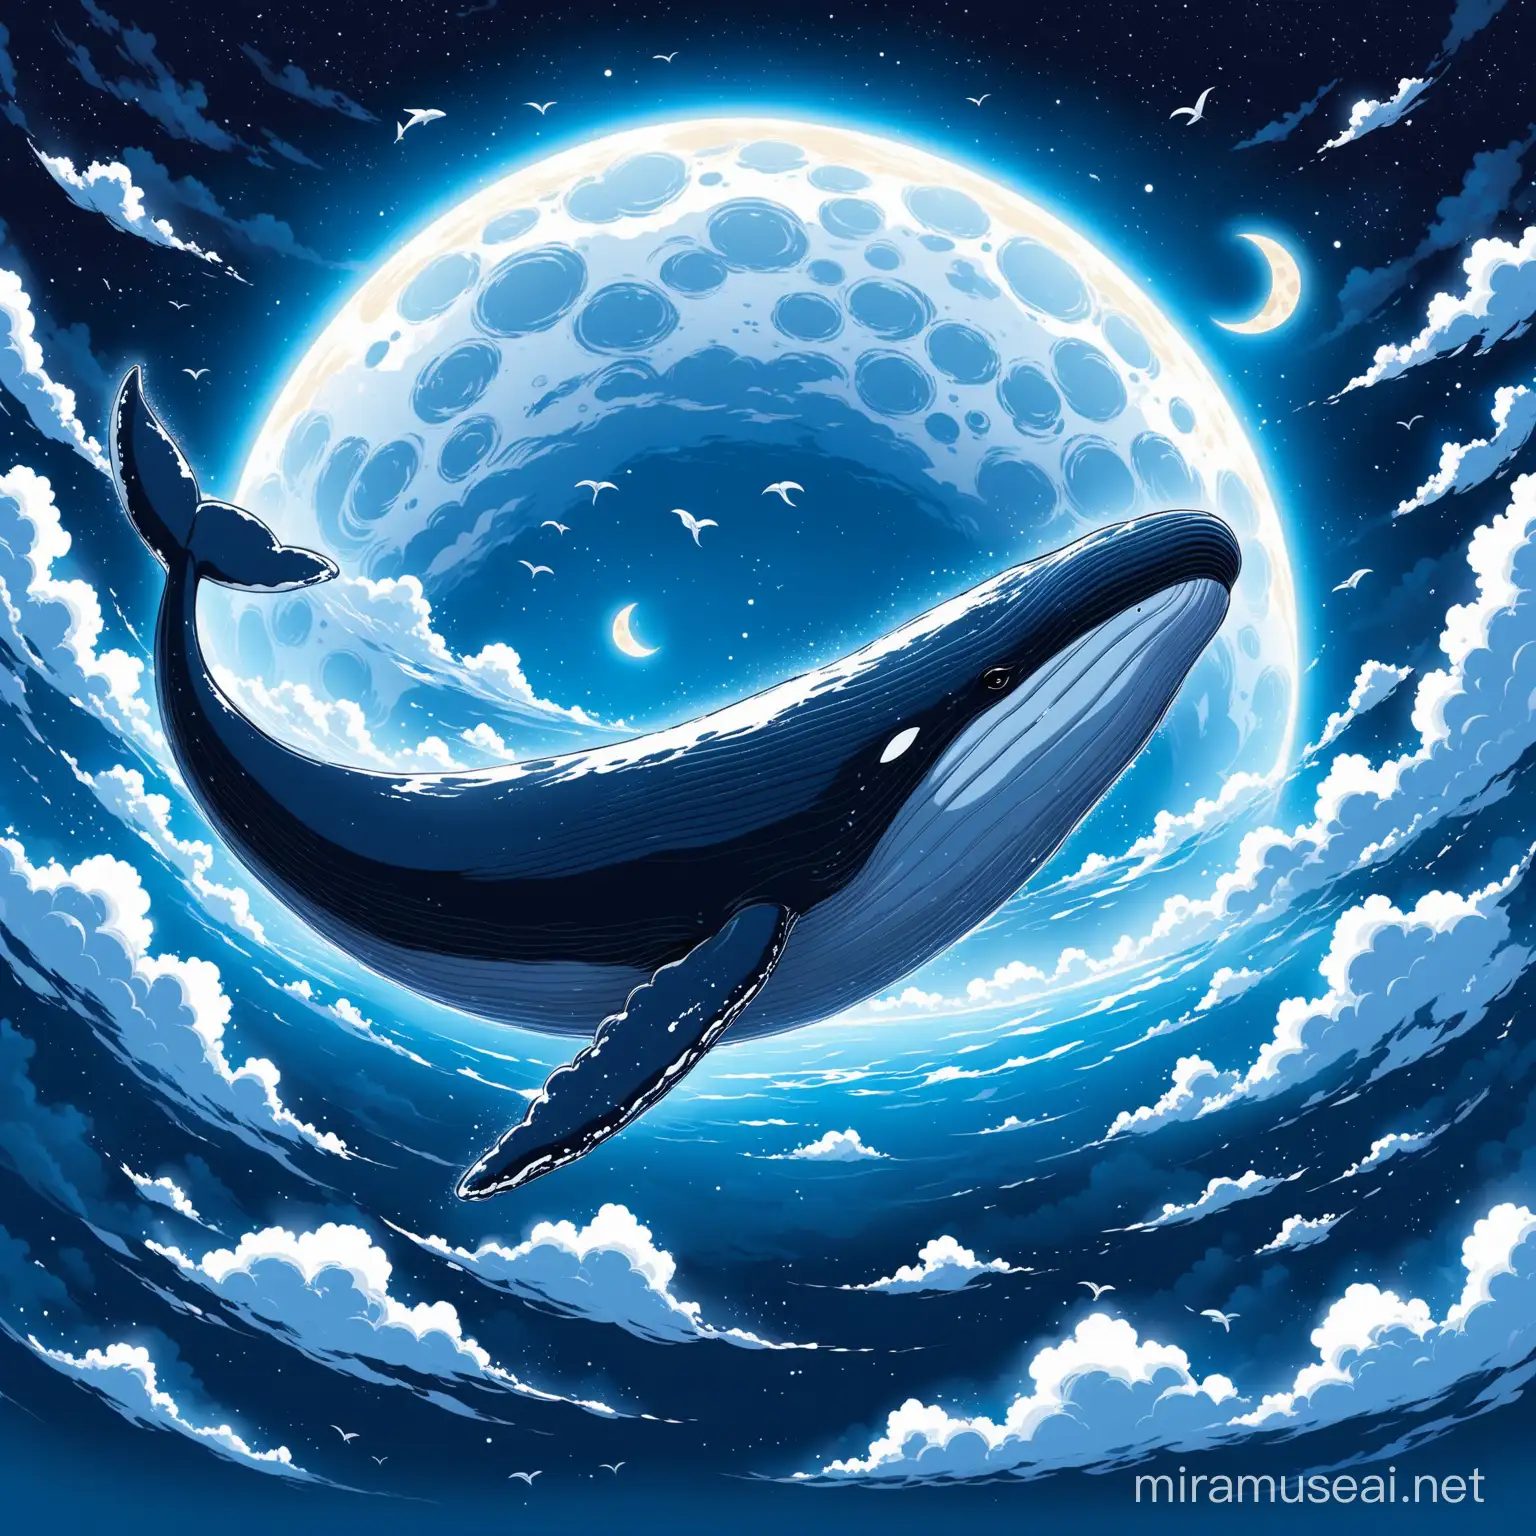 Whale on the Moon Surrounded by Clouds